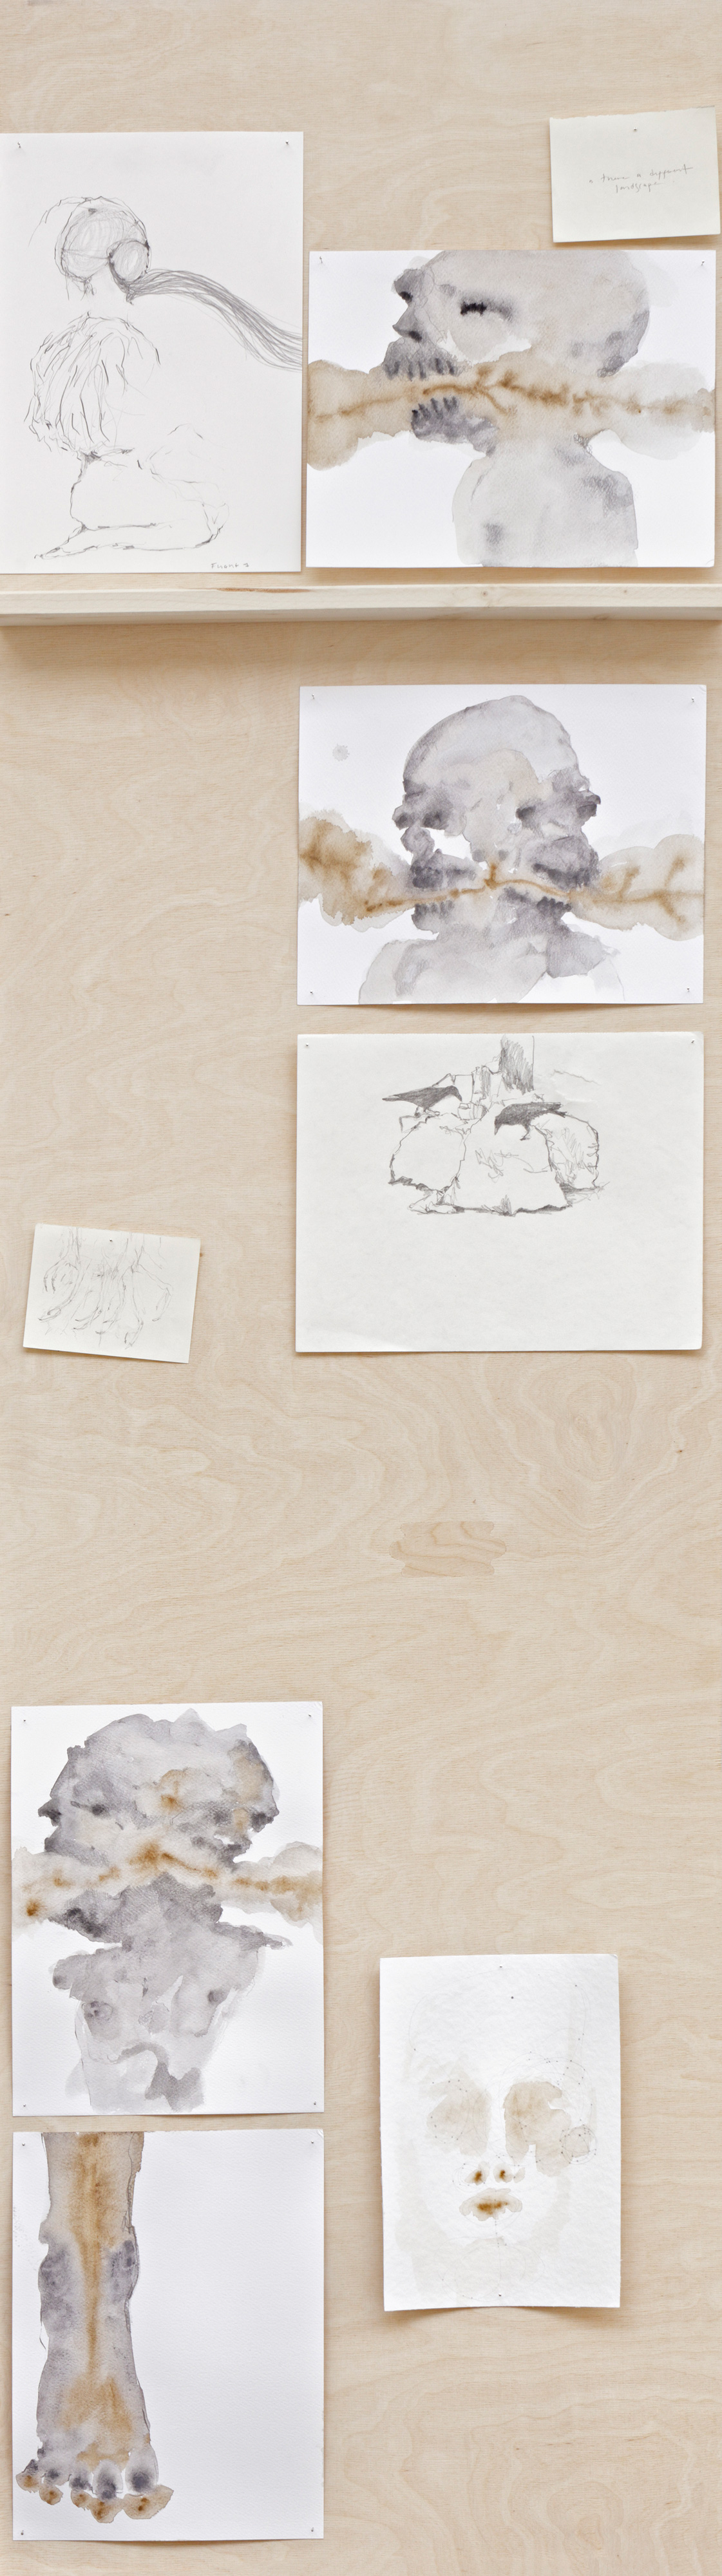 Galerie Barbara Thumm \ In/Tangible \ Pannel #6 (2015 &#8211; 2016)